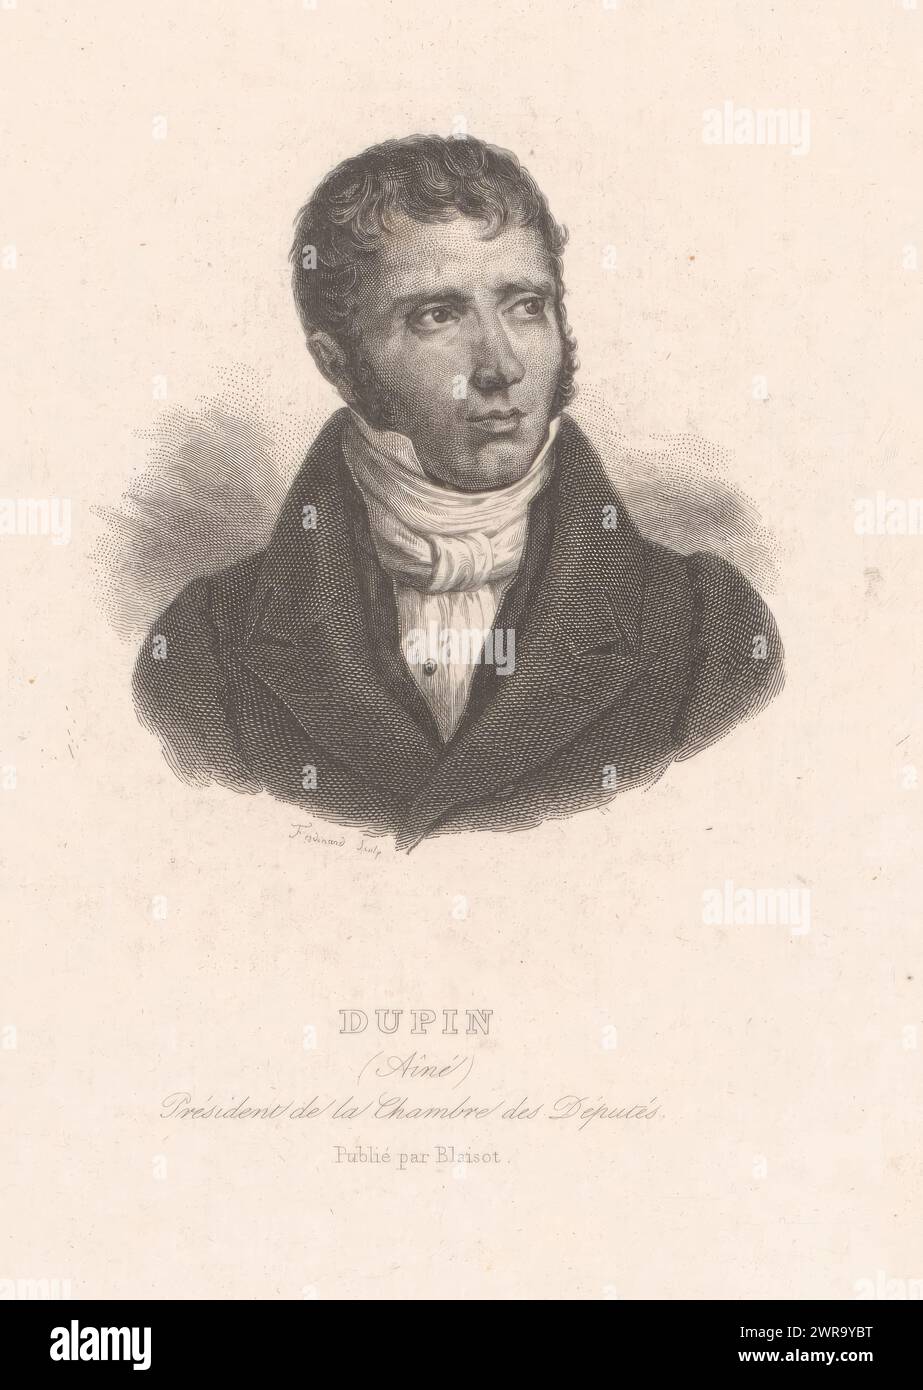 Portrait of André Dupin, Dupin (title on object), print maker: Ferdinand (graveur), publisher: Blaisot, print maker: France, publisher: Paris, 1800 - 1900, paper, steel engraving, height 203 mm × width 122 mm, print Stock Photo